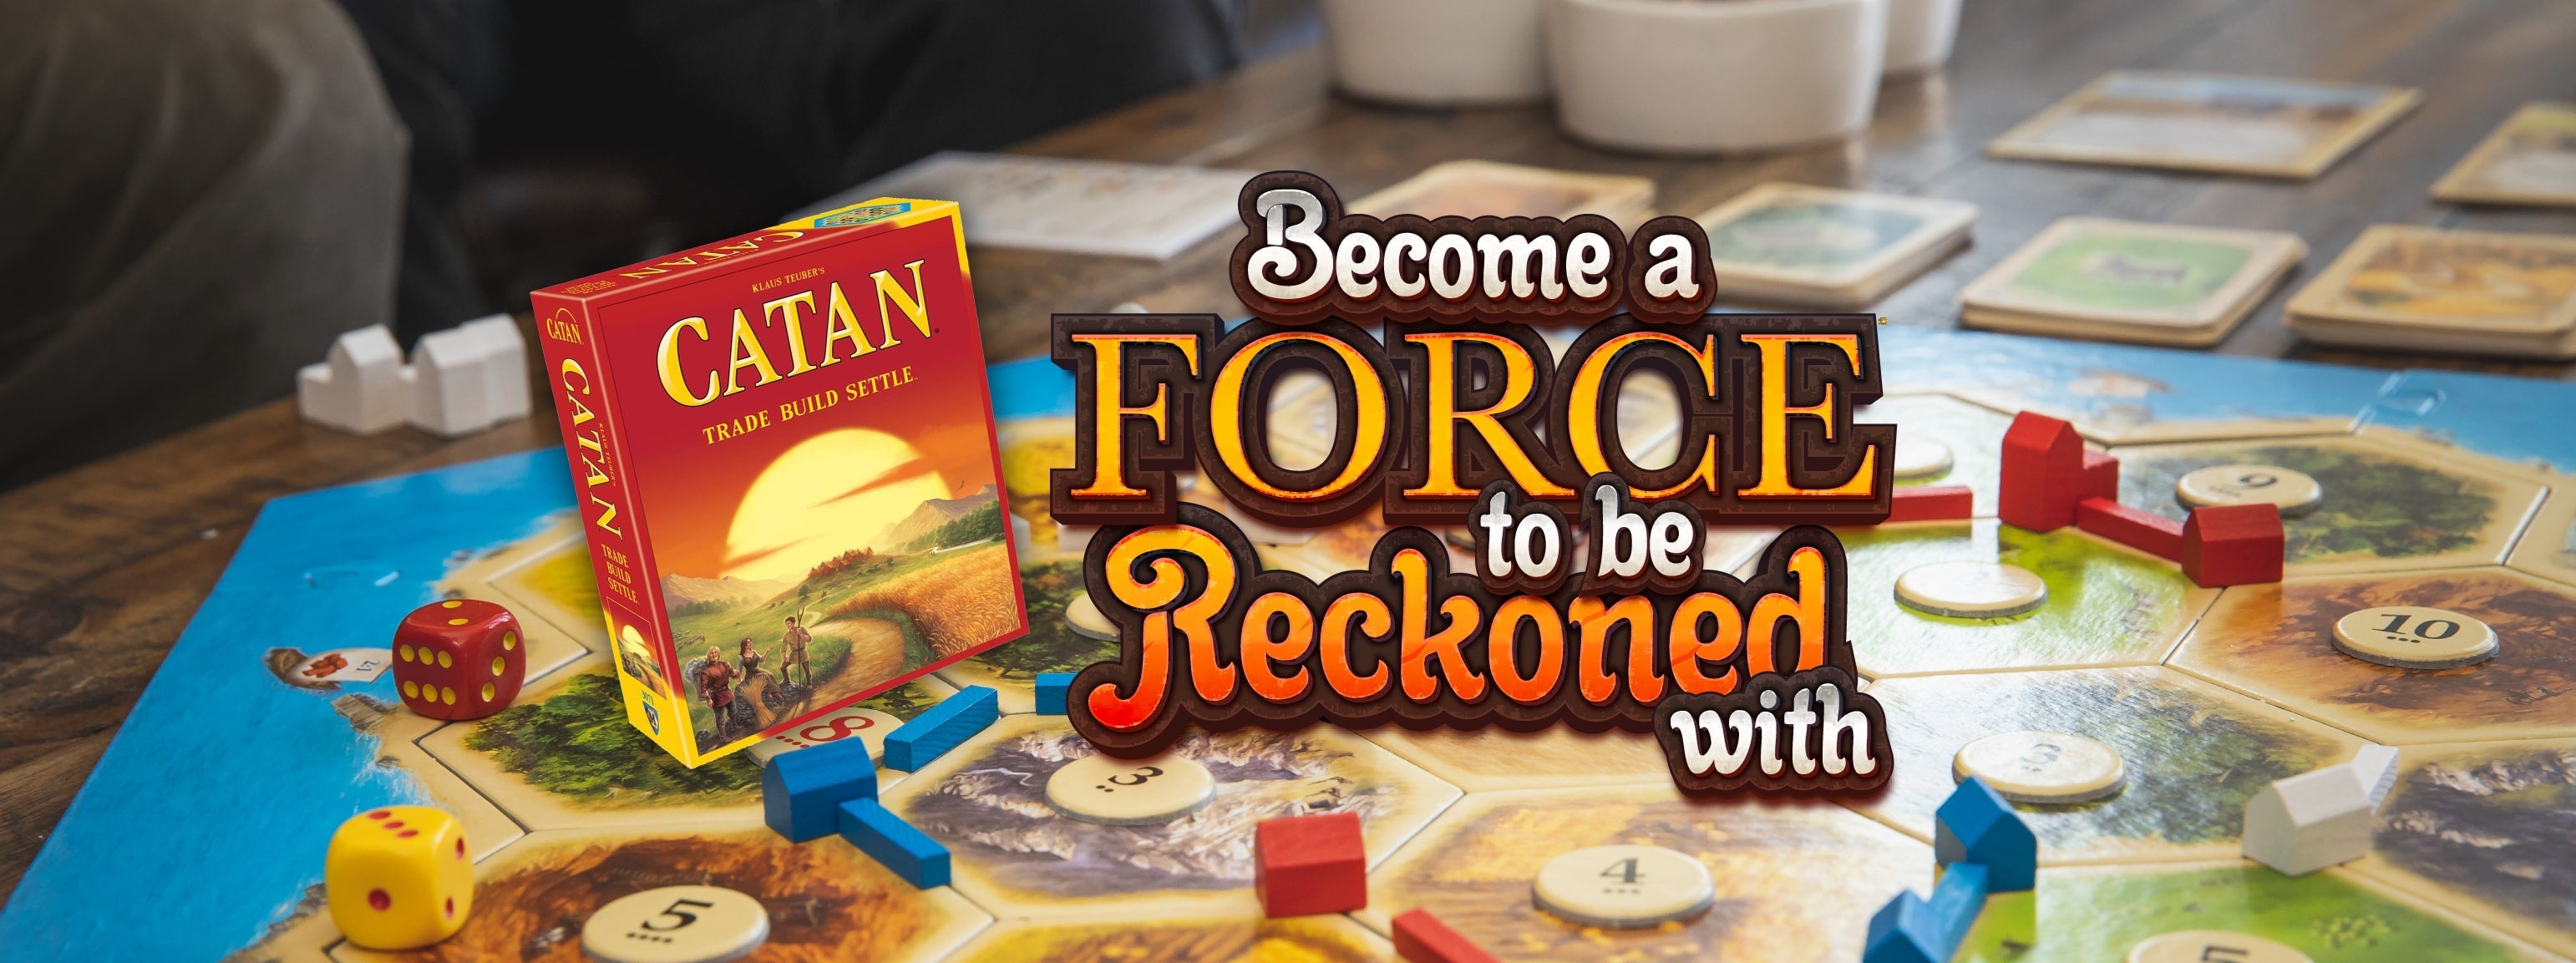 Become a force to be reckoned with. Shop Catan.